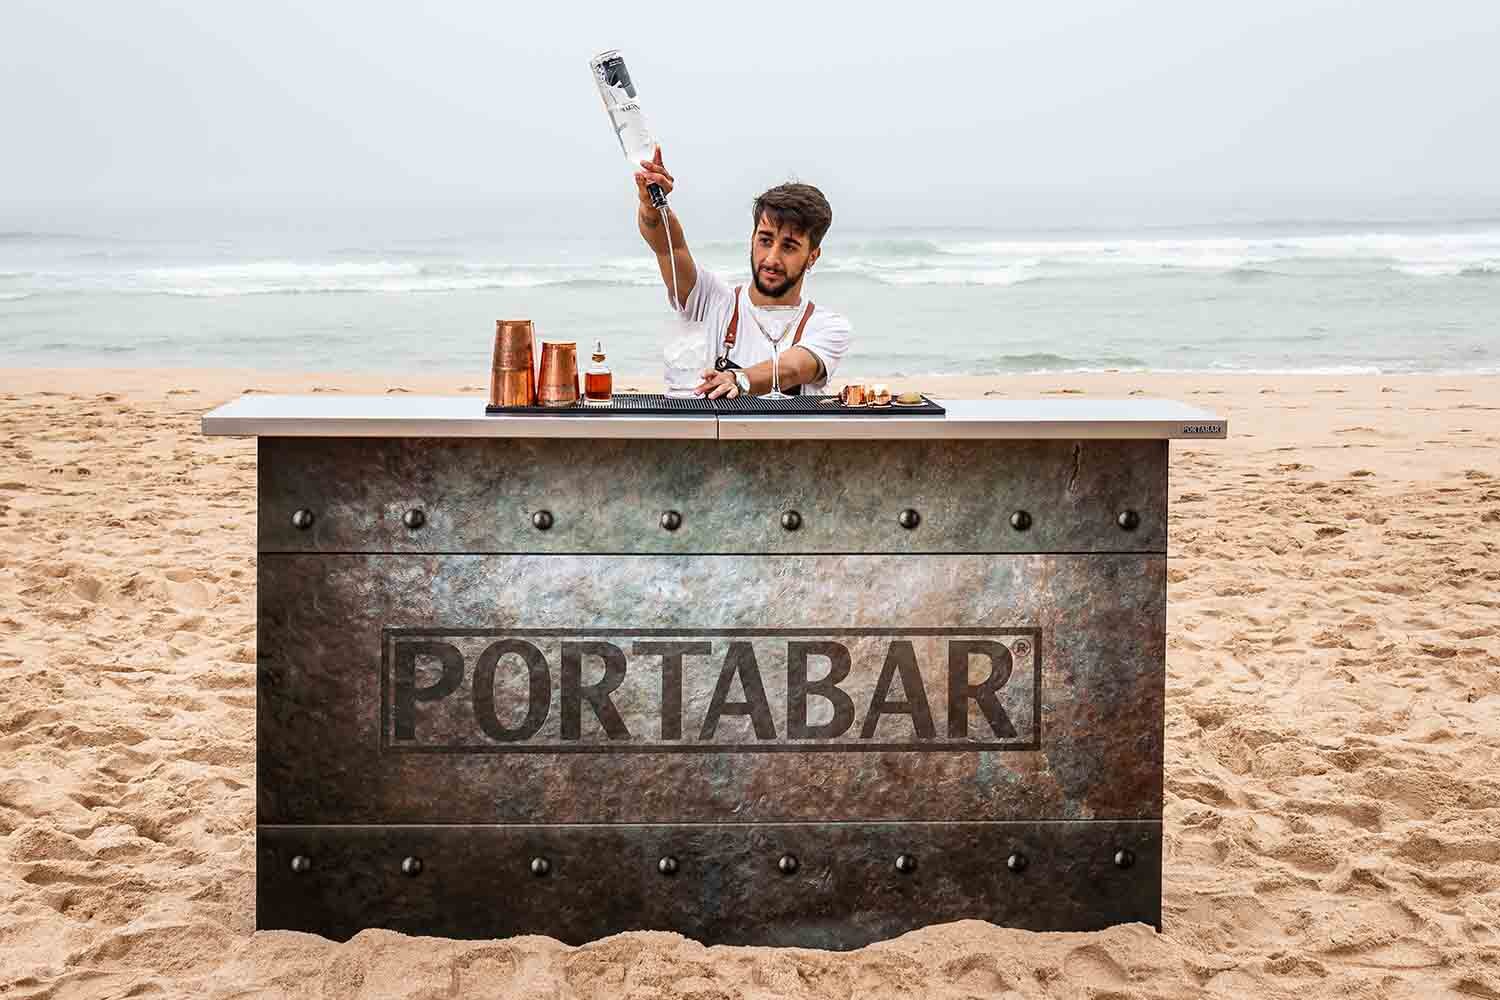 Outdoor Event Bars That Are Mobile by Portabar